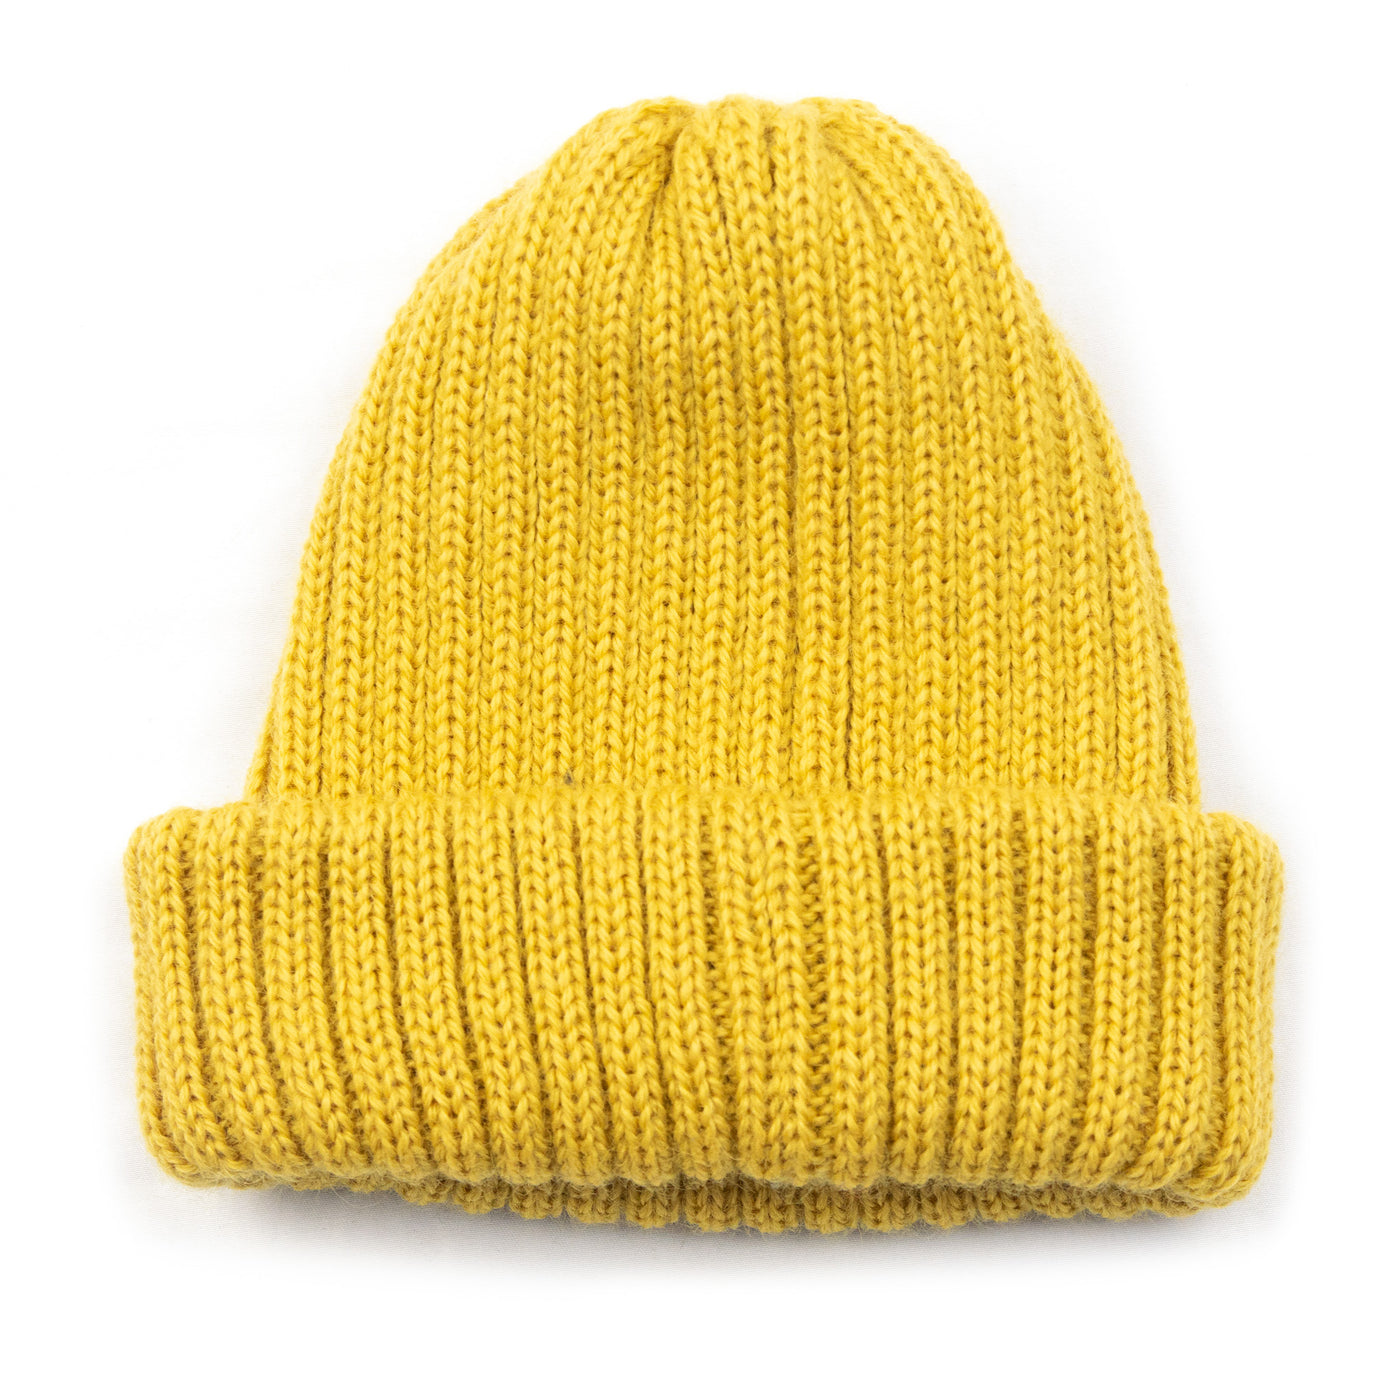 Connor Reilly Wool Watch Cap Mustard Made In England BACK